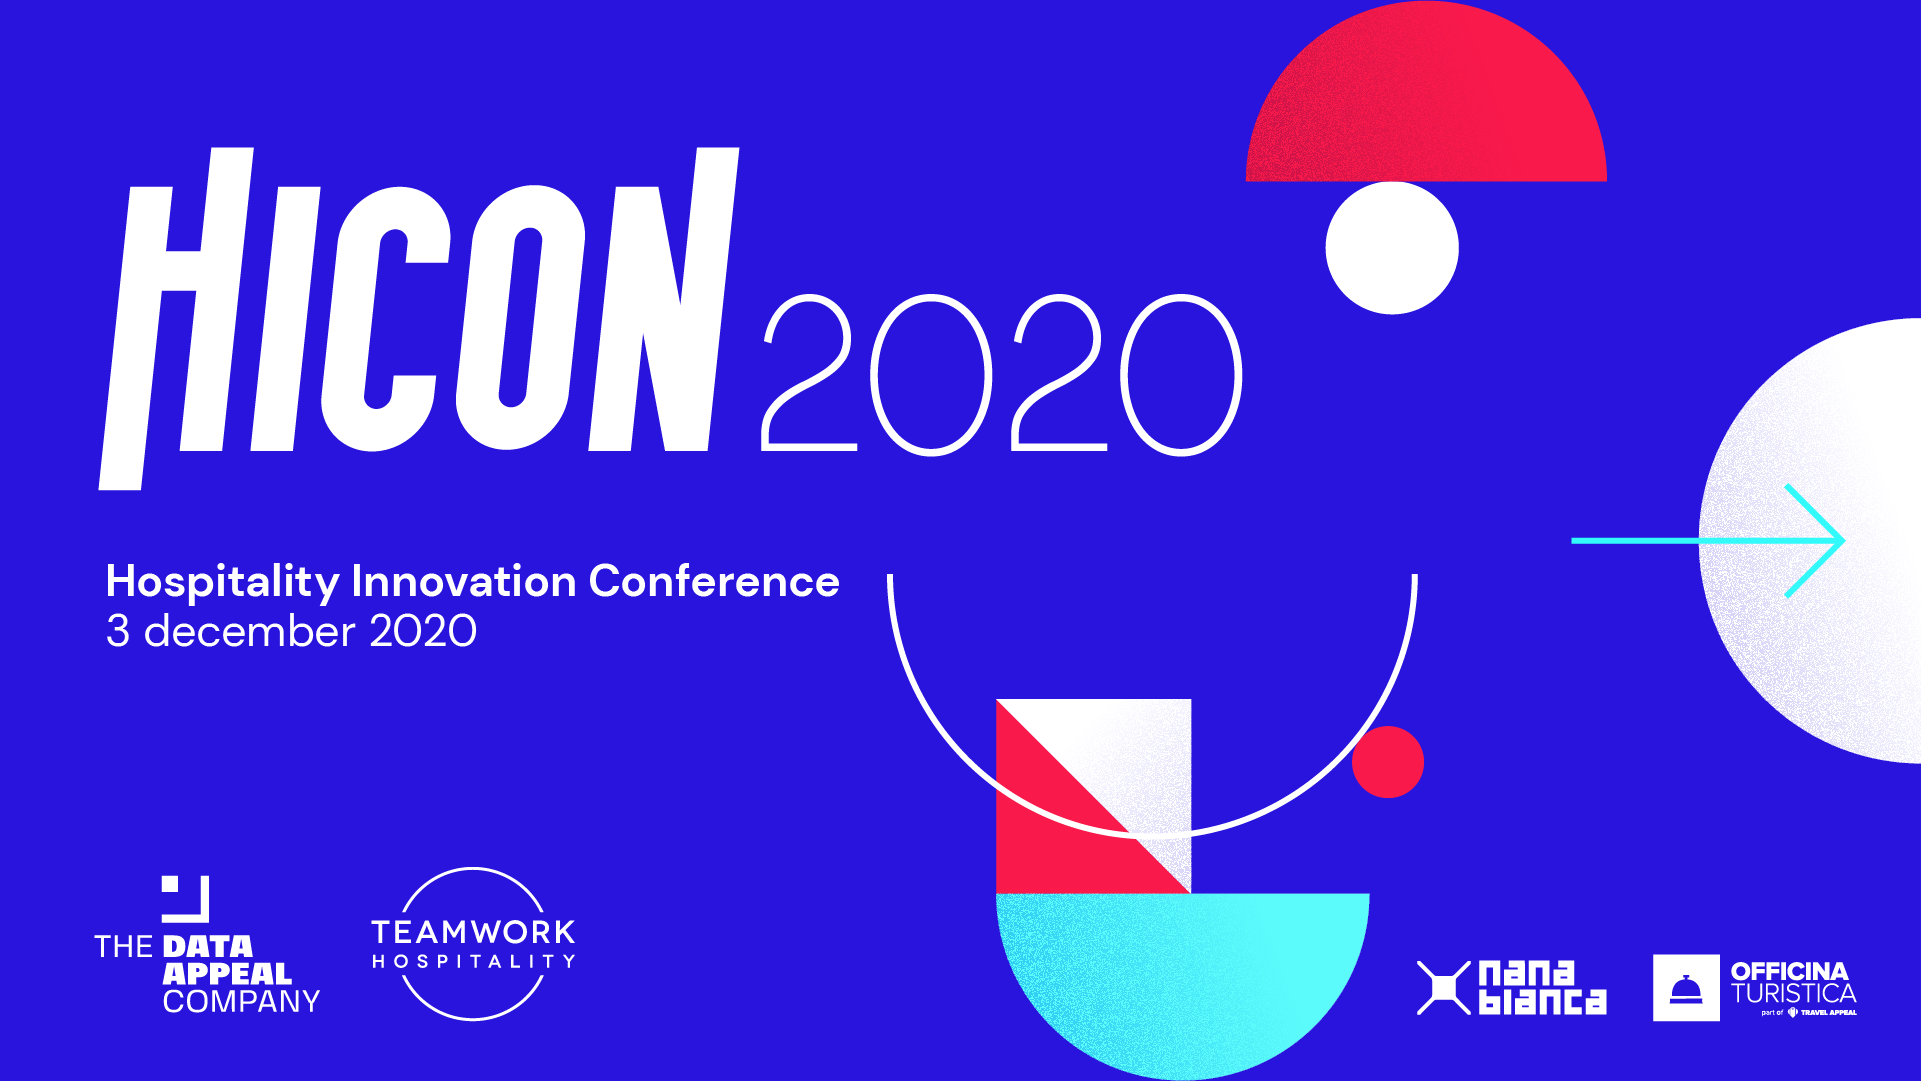 HICON2020 - Hospitality Innovation Conference